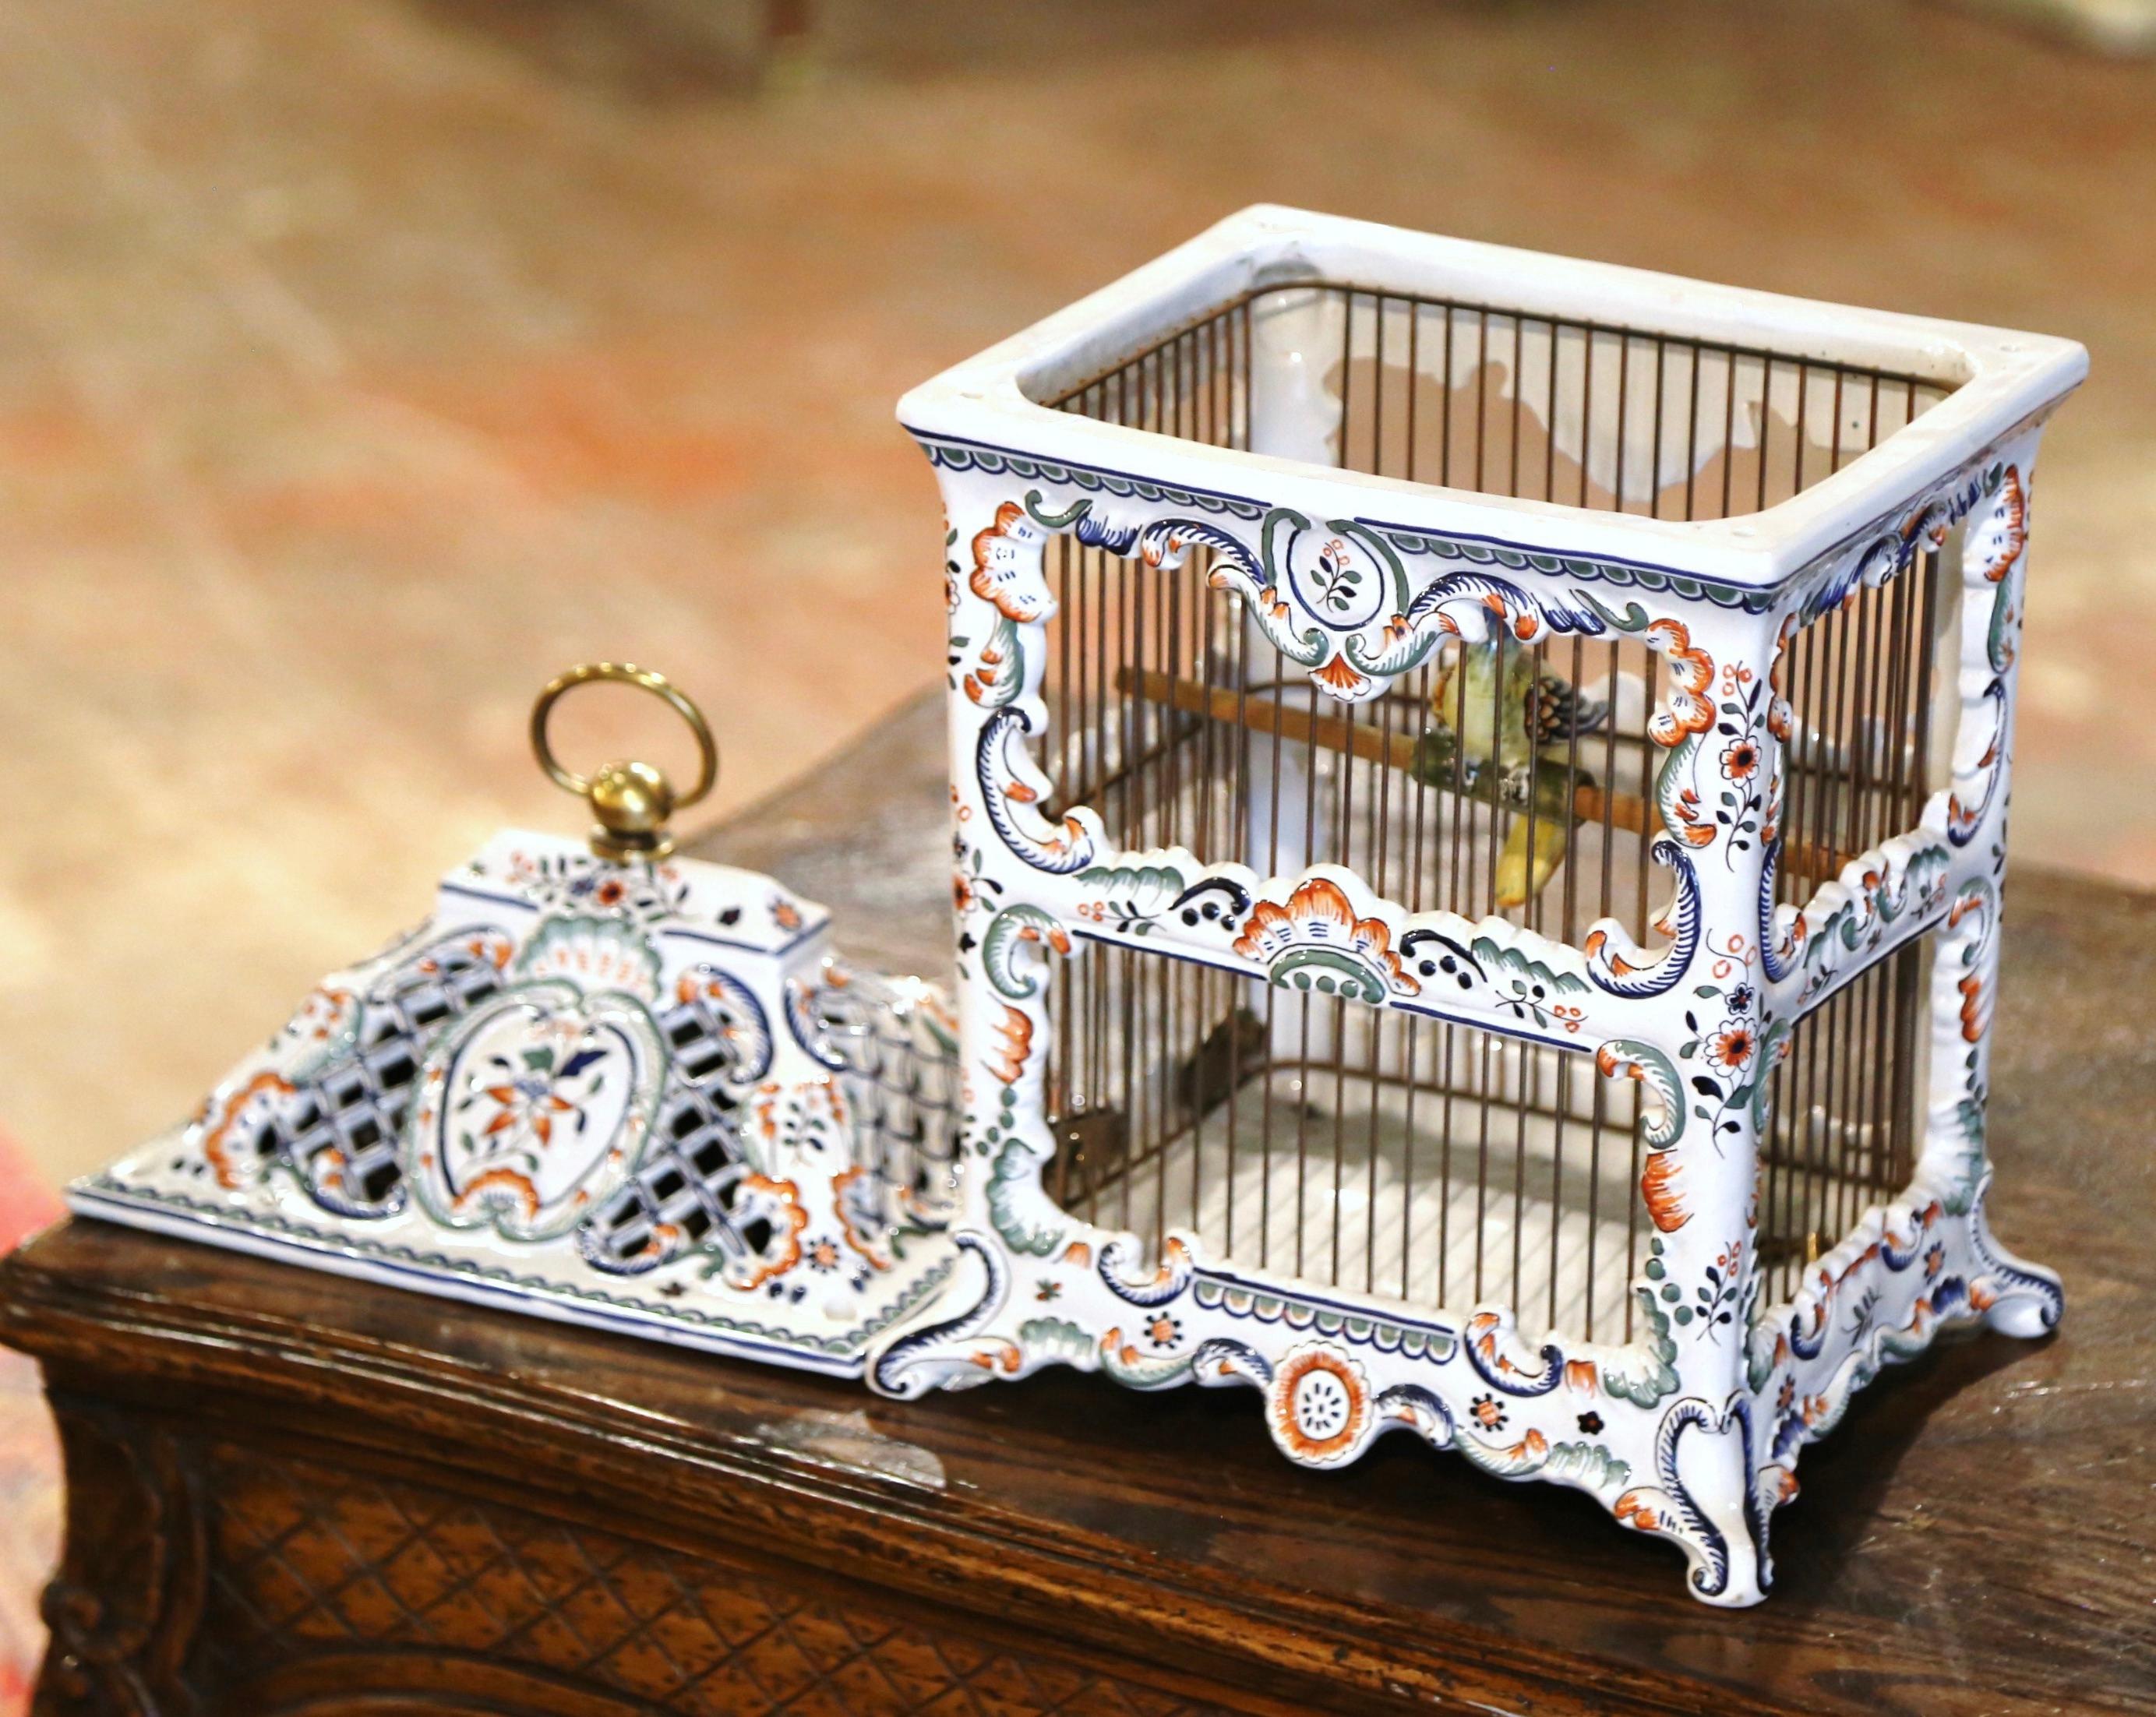 Midcentury French Decorative Hand Painted Porcelain Birdcage from Normandy 4